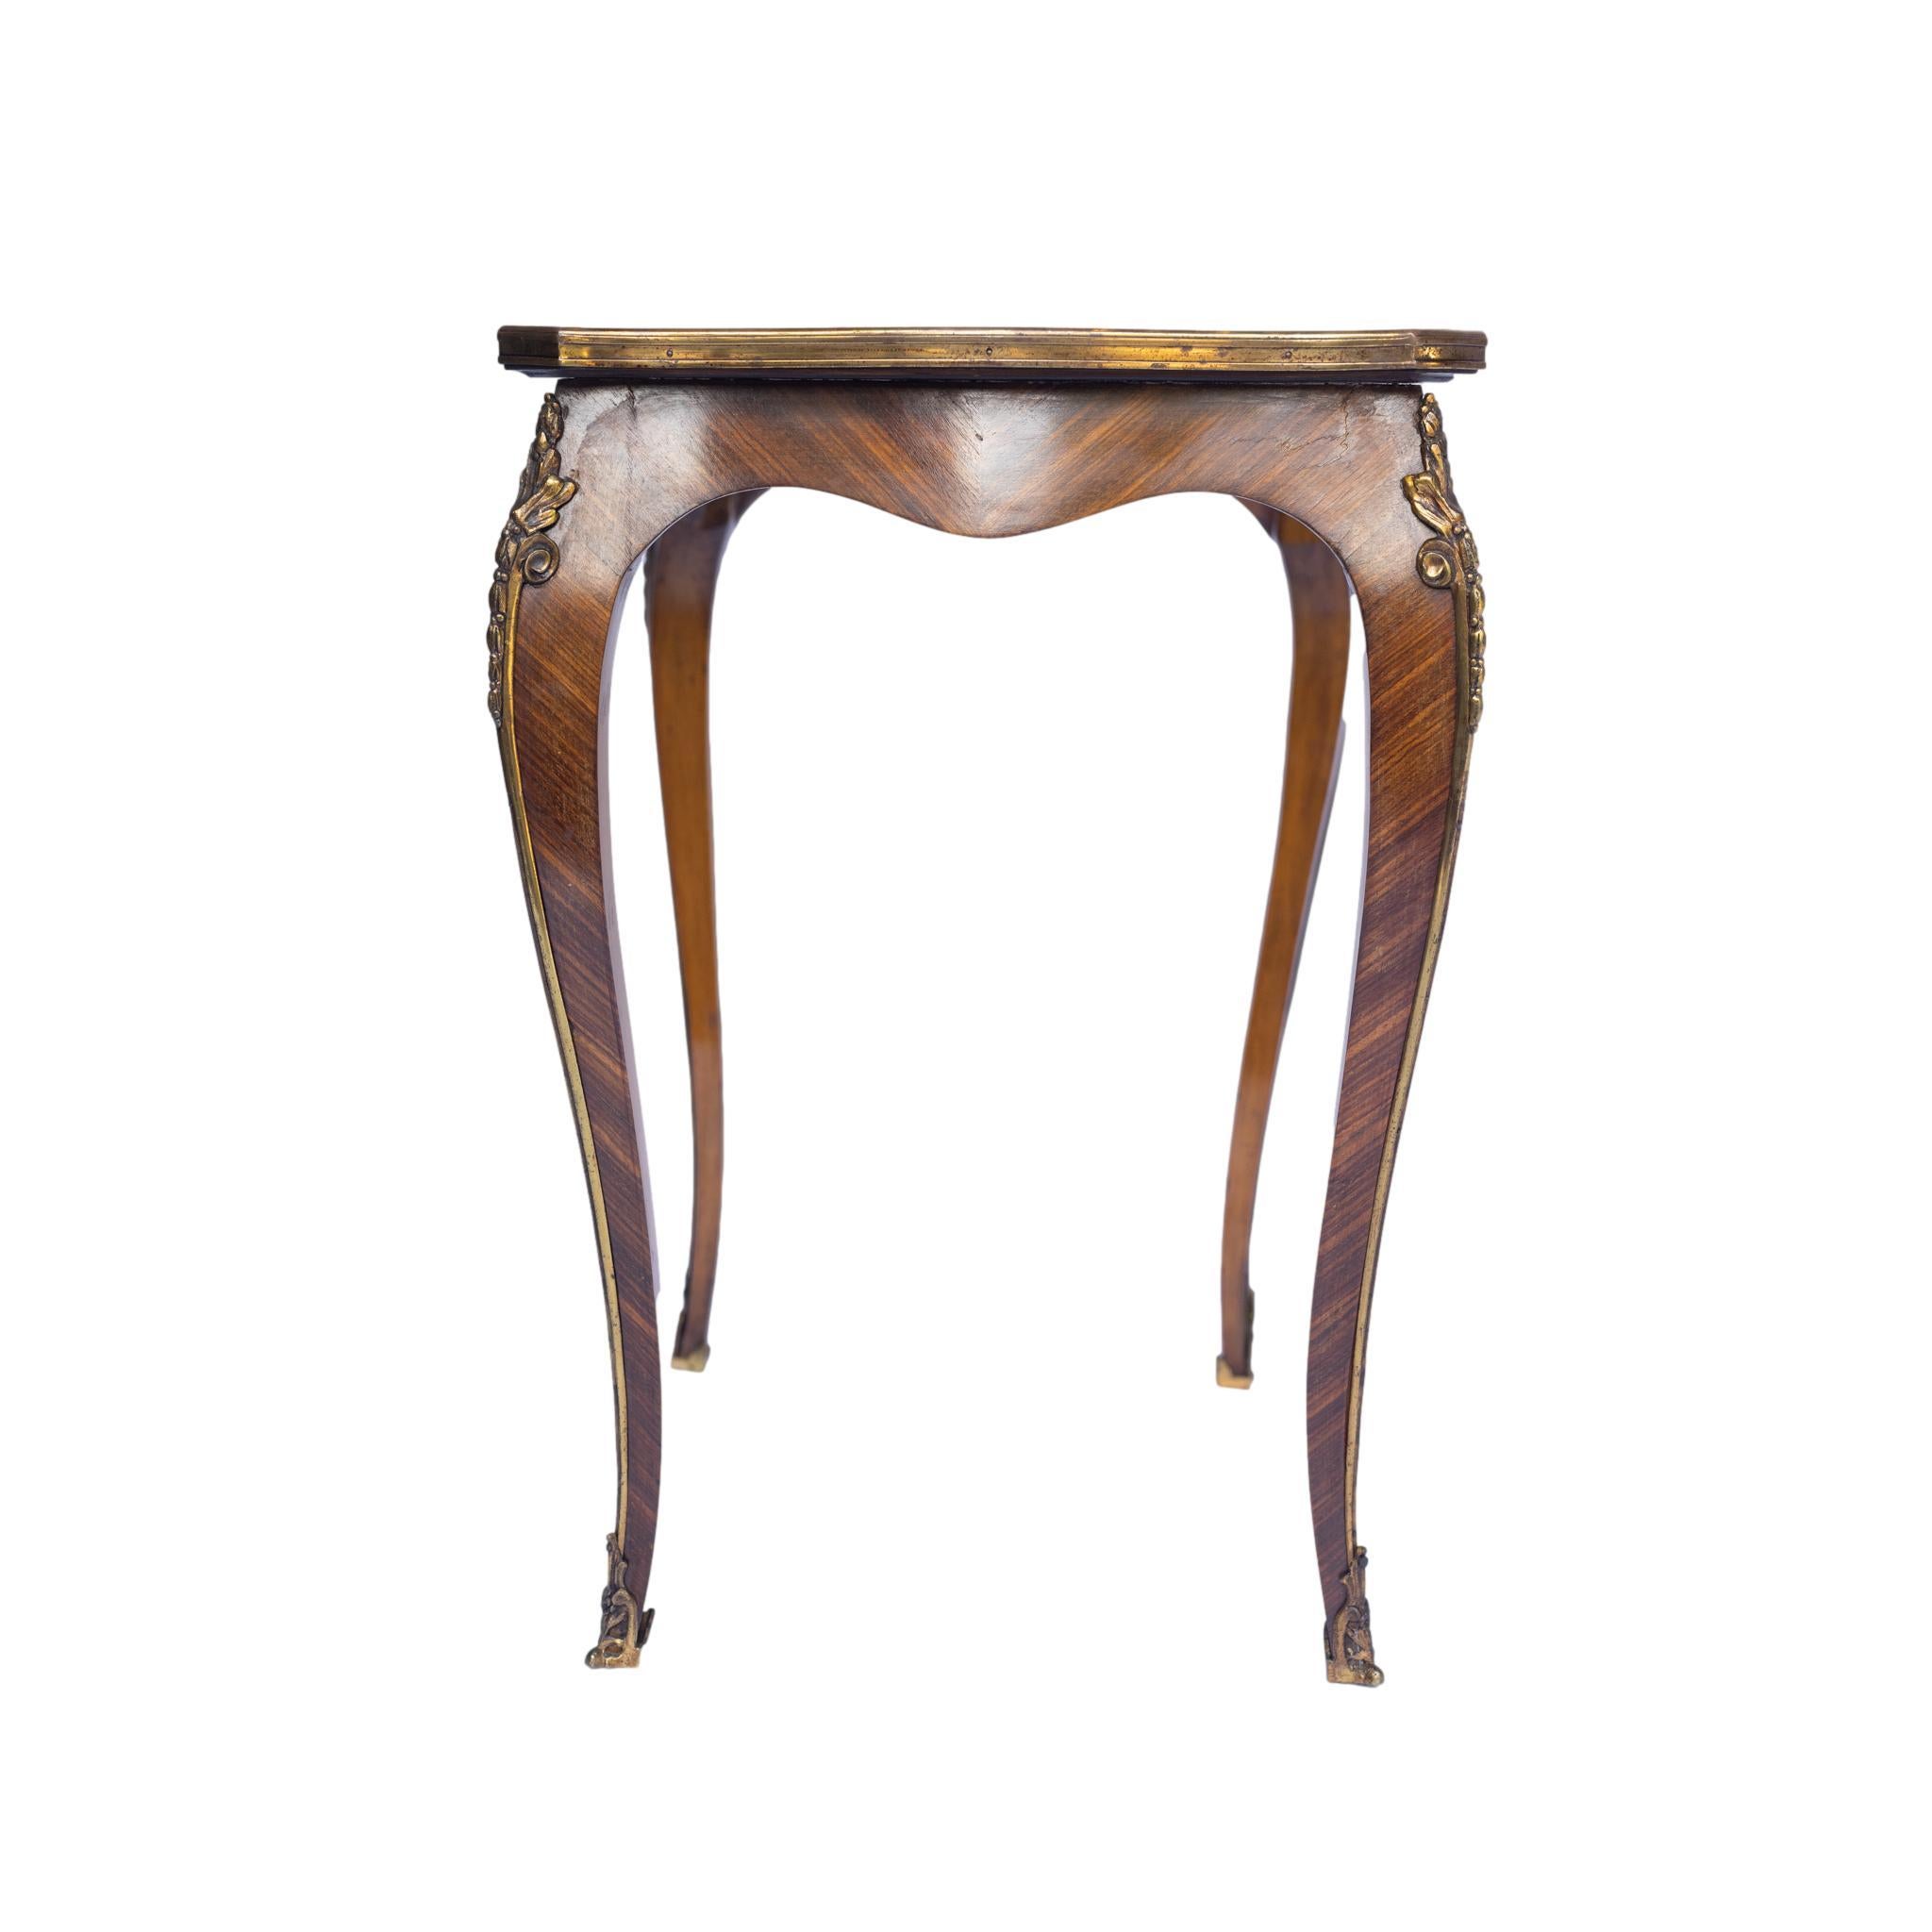 Set Three Louis XV-Style Kingwood and Parquetry Nesting Tables, French, c. 1880 For Sale 4